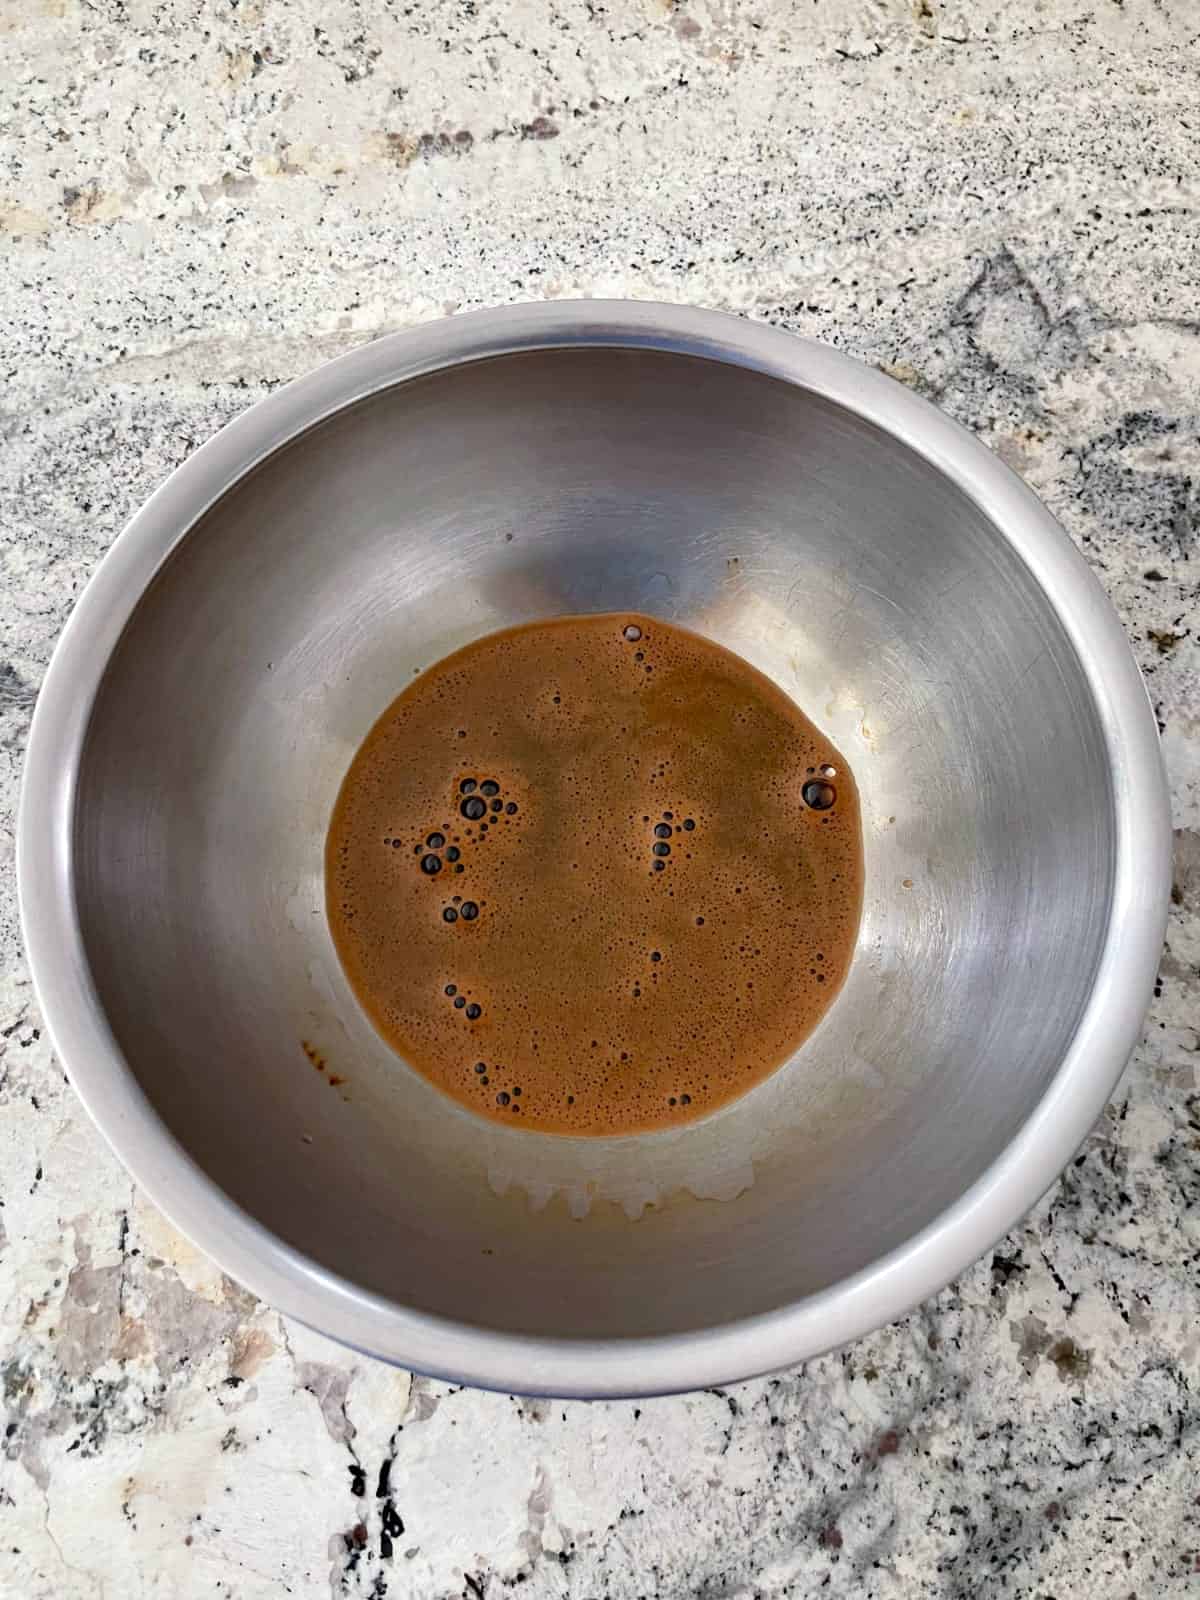 Dissolving instant espresso powder in hot water in mixing bowl.